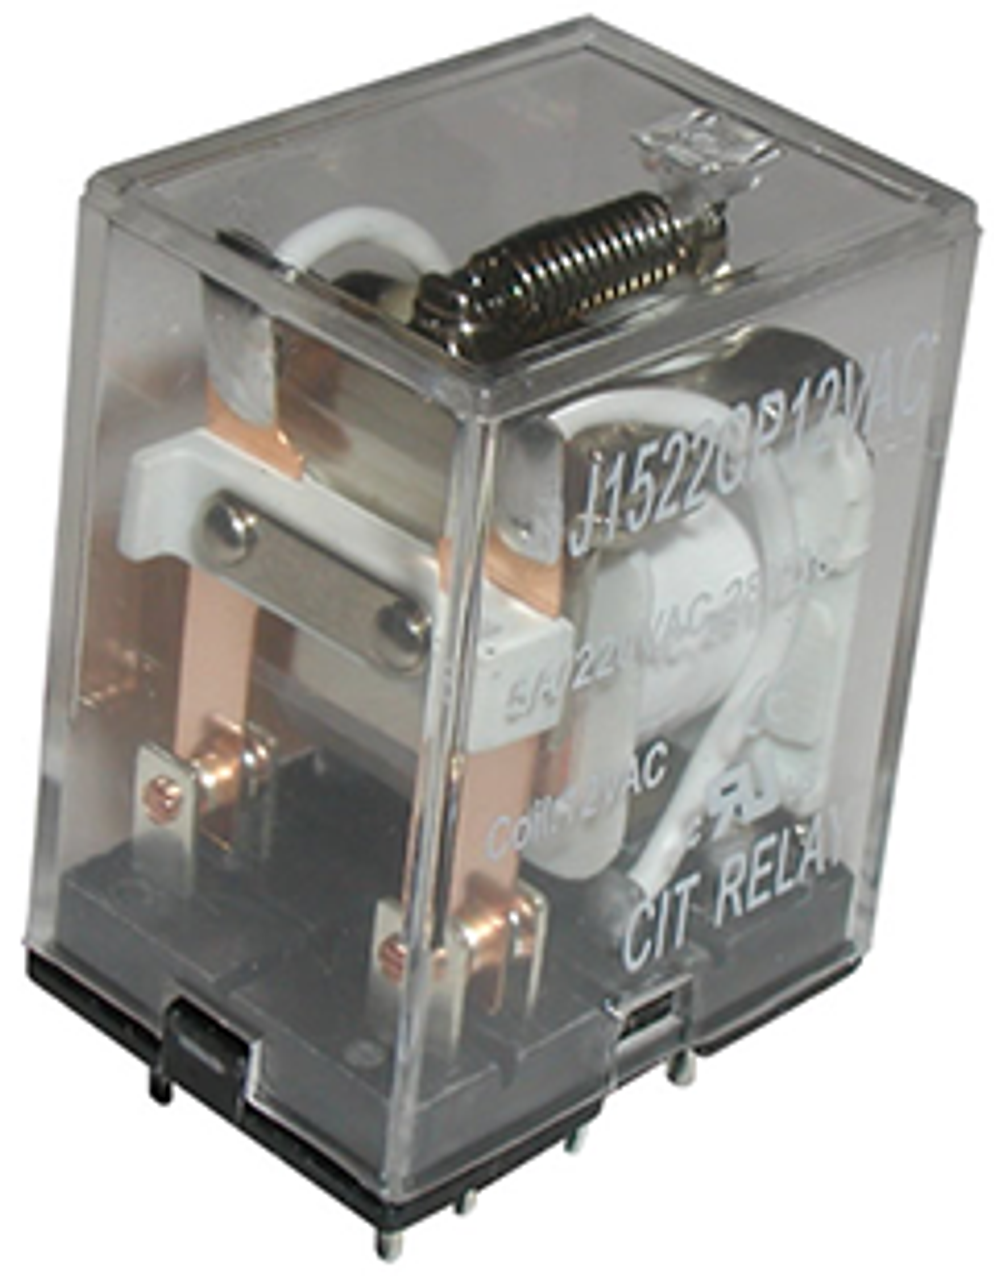 CIT Relay and Switch J1524CT110VACDT Industrial Relays